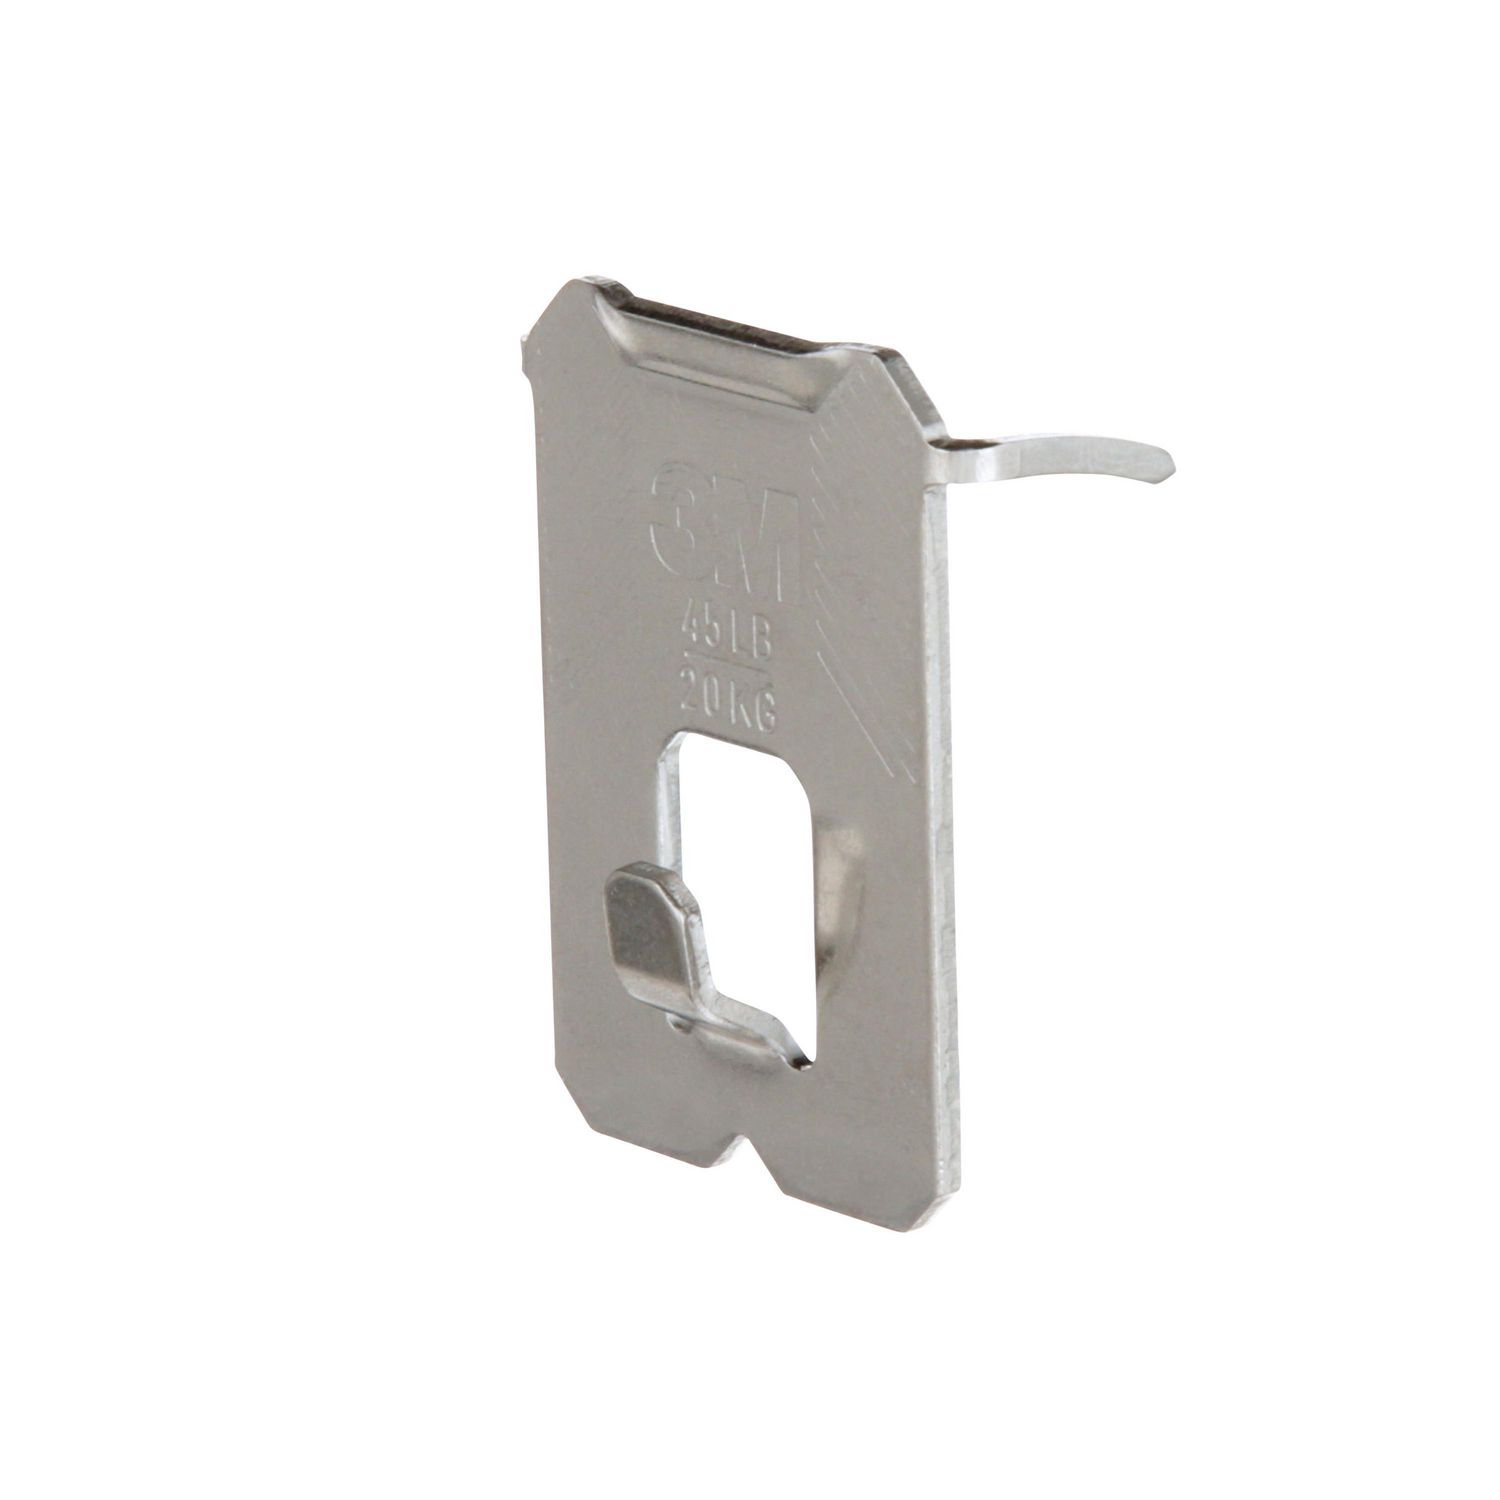 3M™ CLAW Drywall Picture Hanger with Temporary Spot Marker 3PH45M